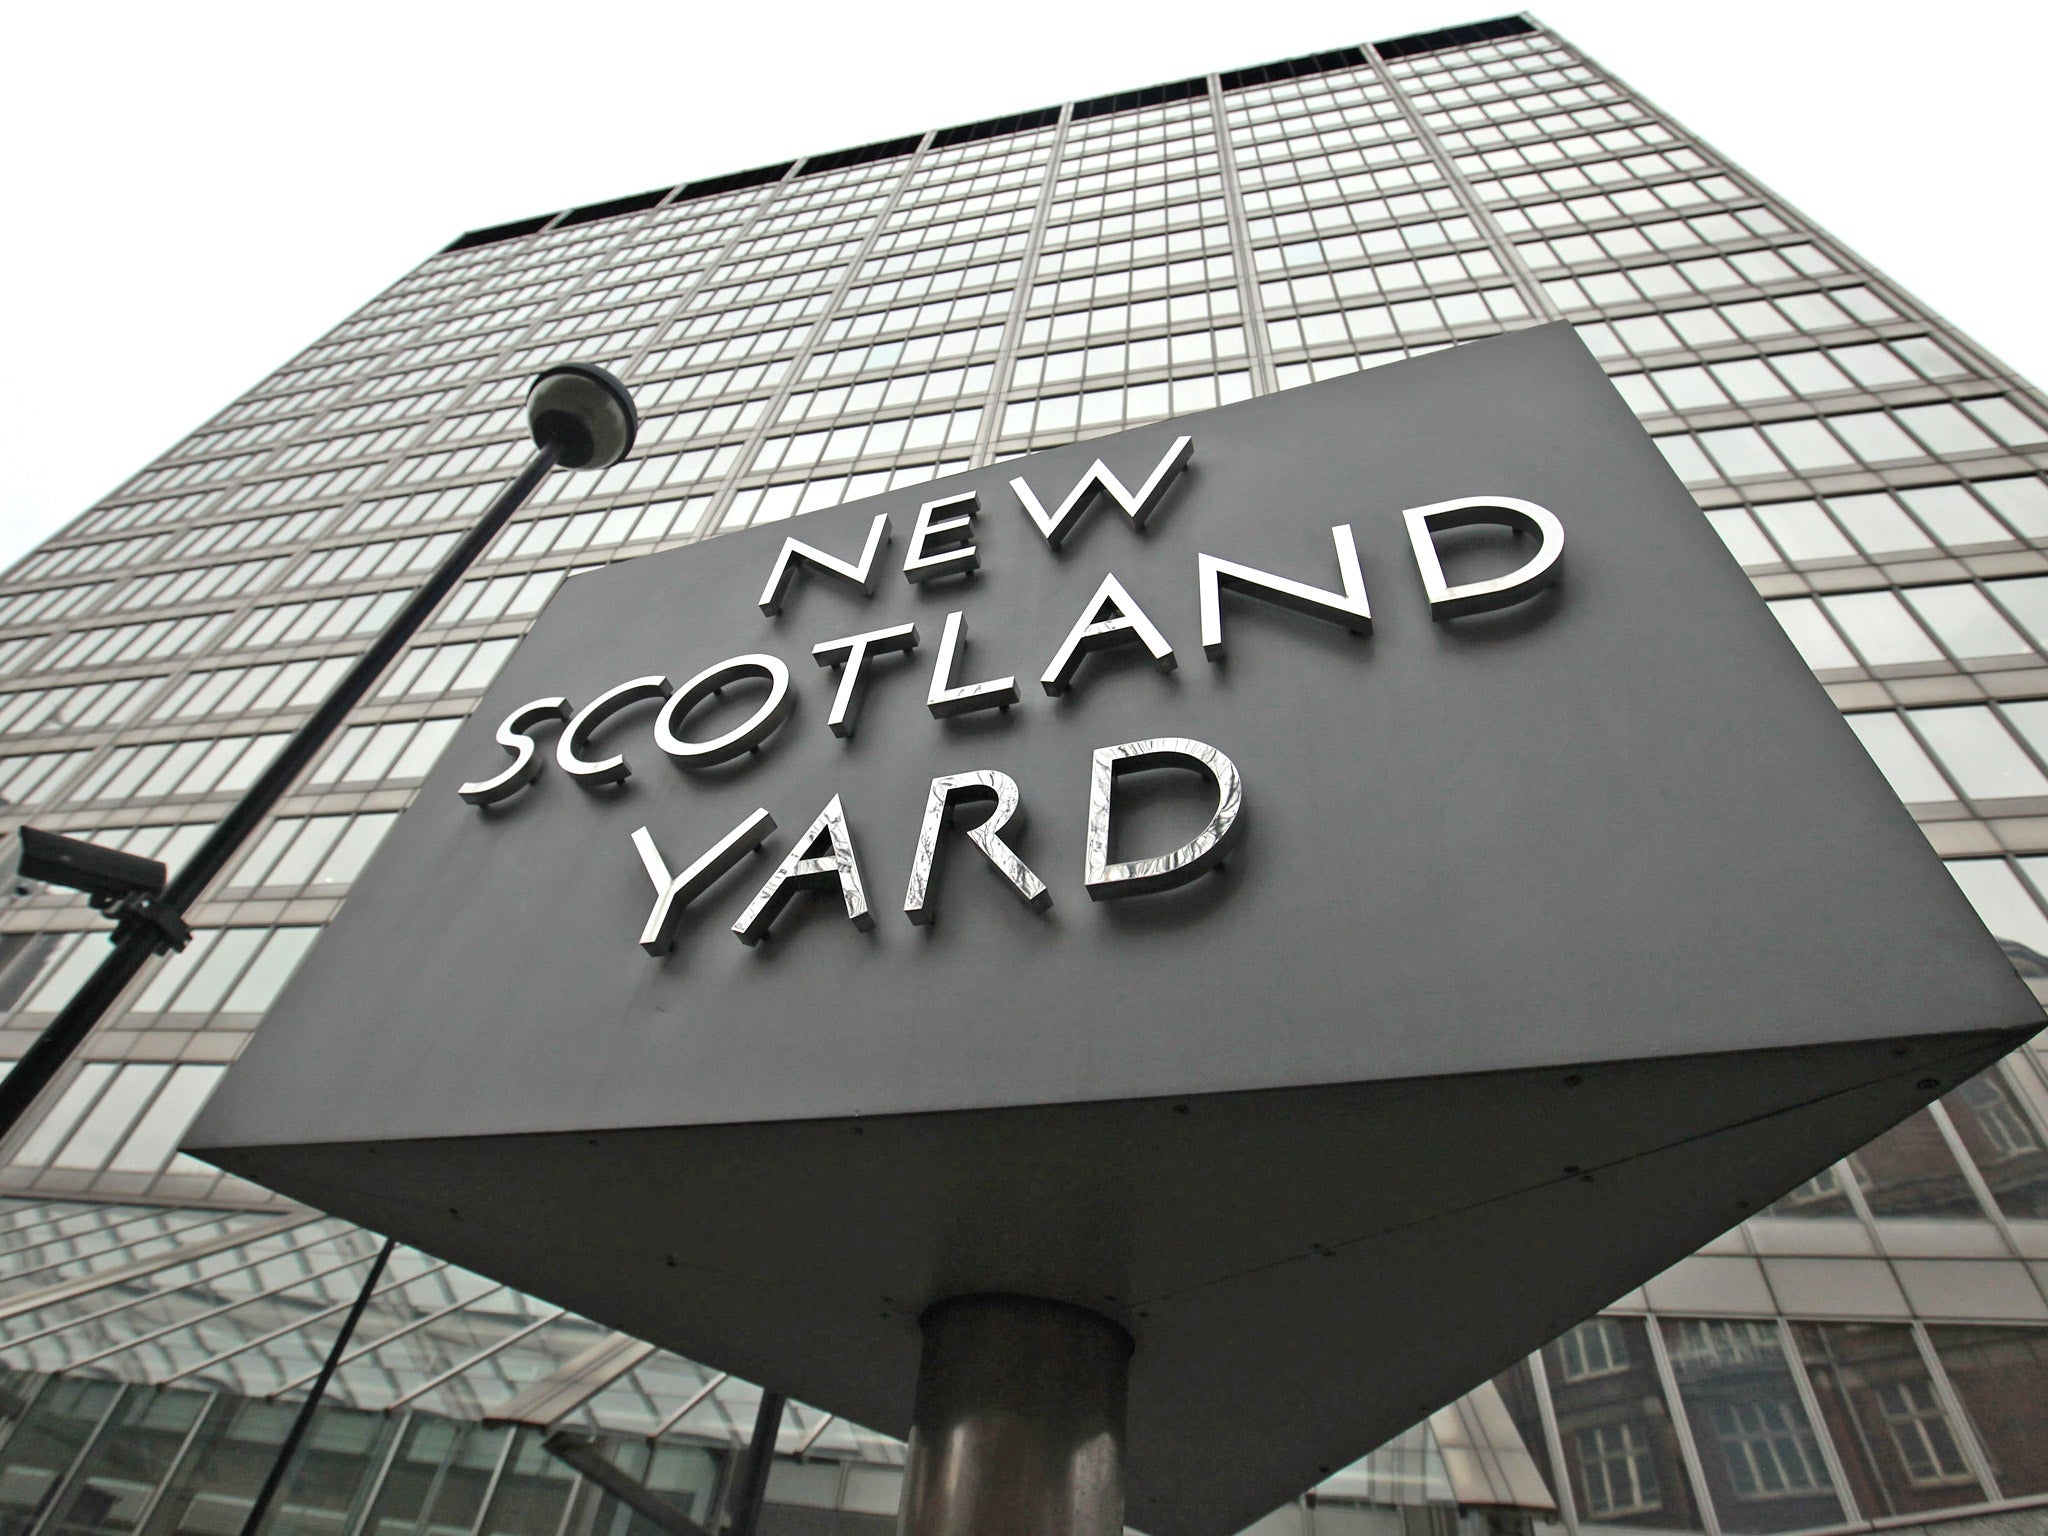 The Metropolitan Police stressed that Operation Fairbank was a 'scoping exercise'